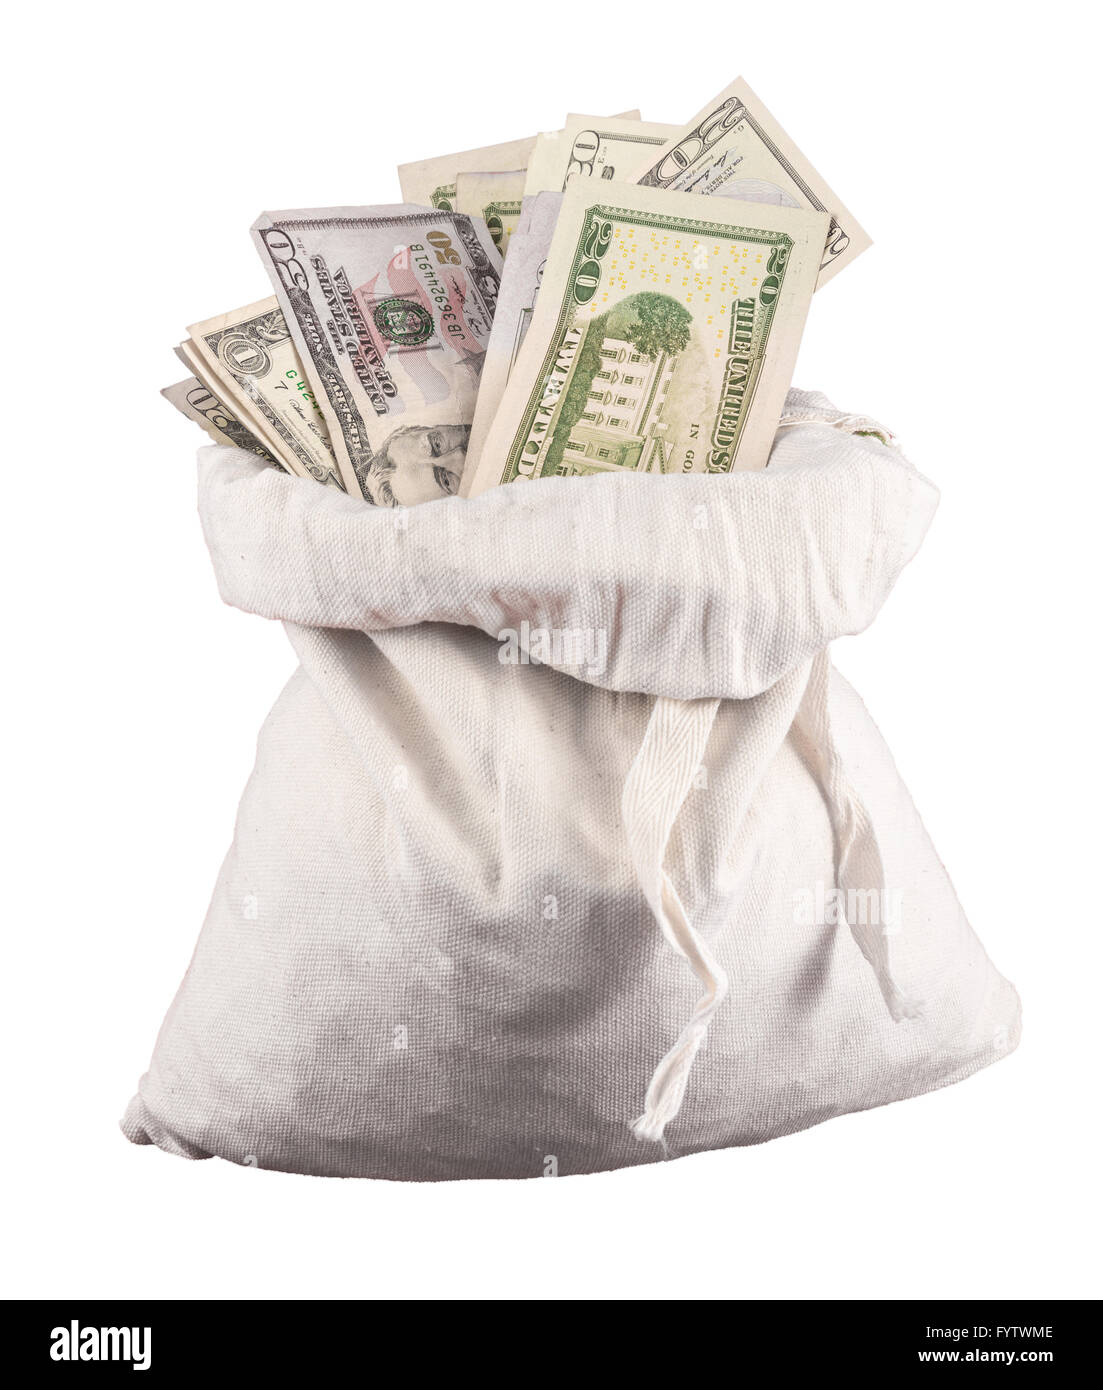 Many US dollar bills or notes with money bags Stock Photo